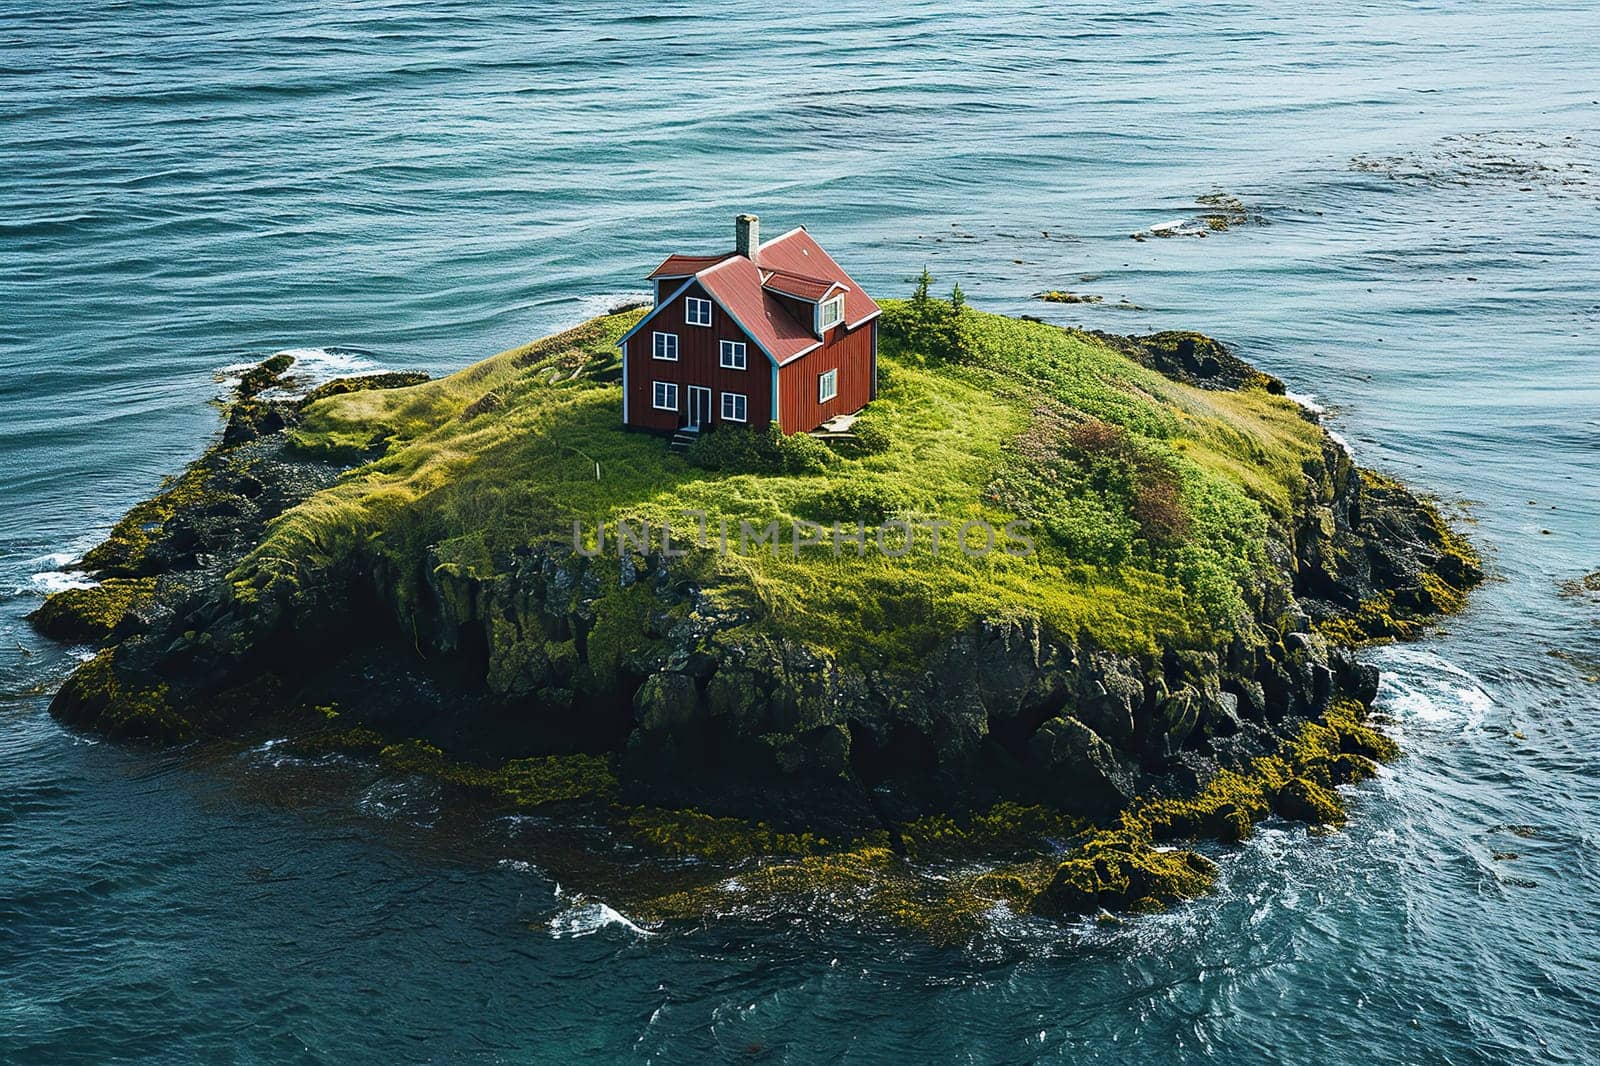 A traditional red Scandinavian fisherman's house on a small island in the middle of the ocean. Generated by artificial intelligence by Vovmar